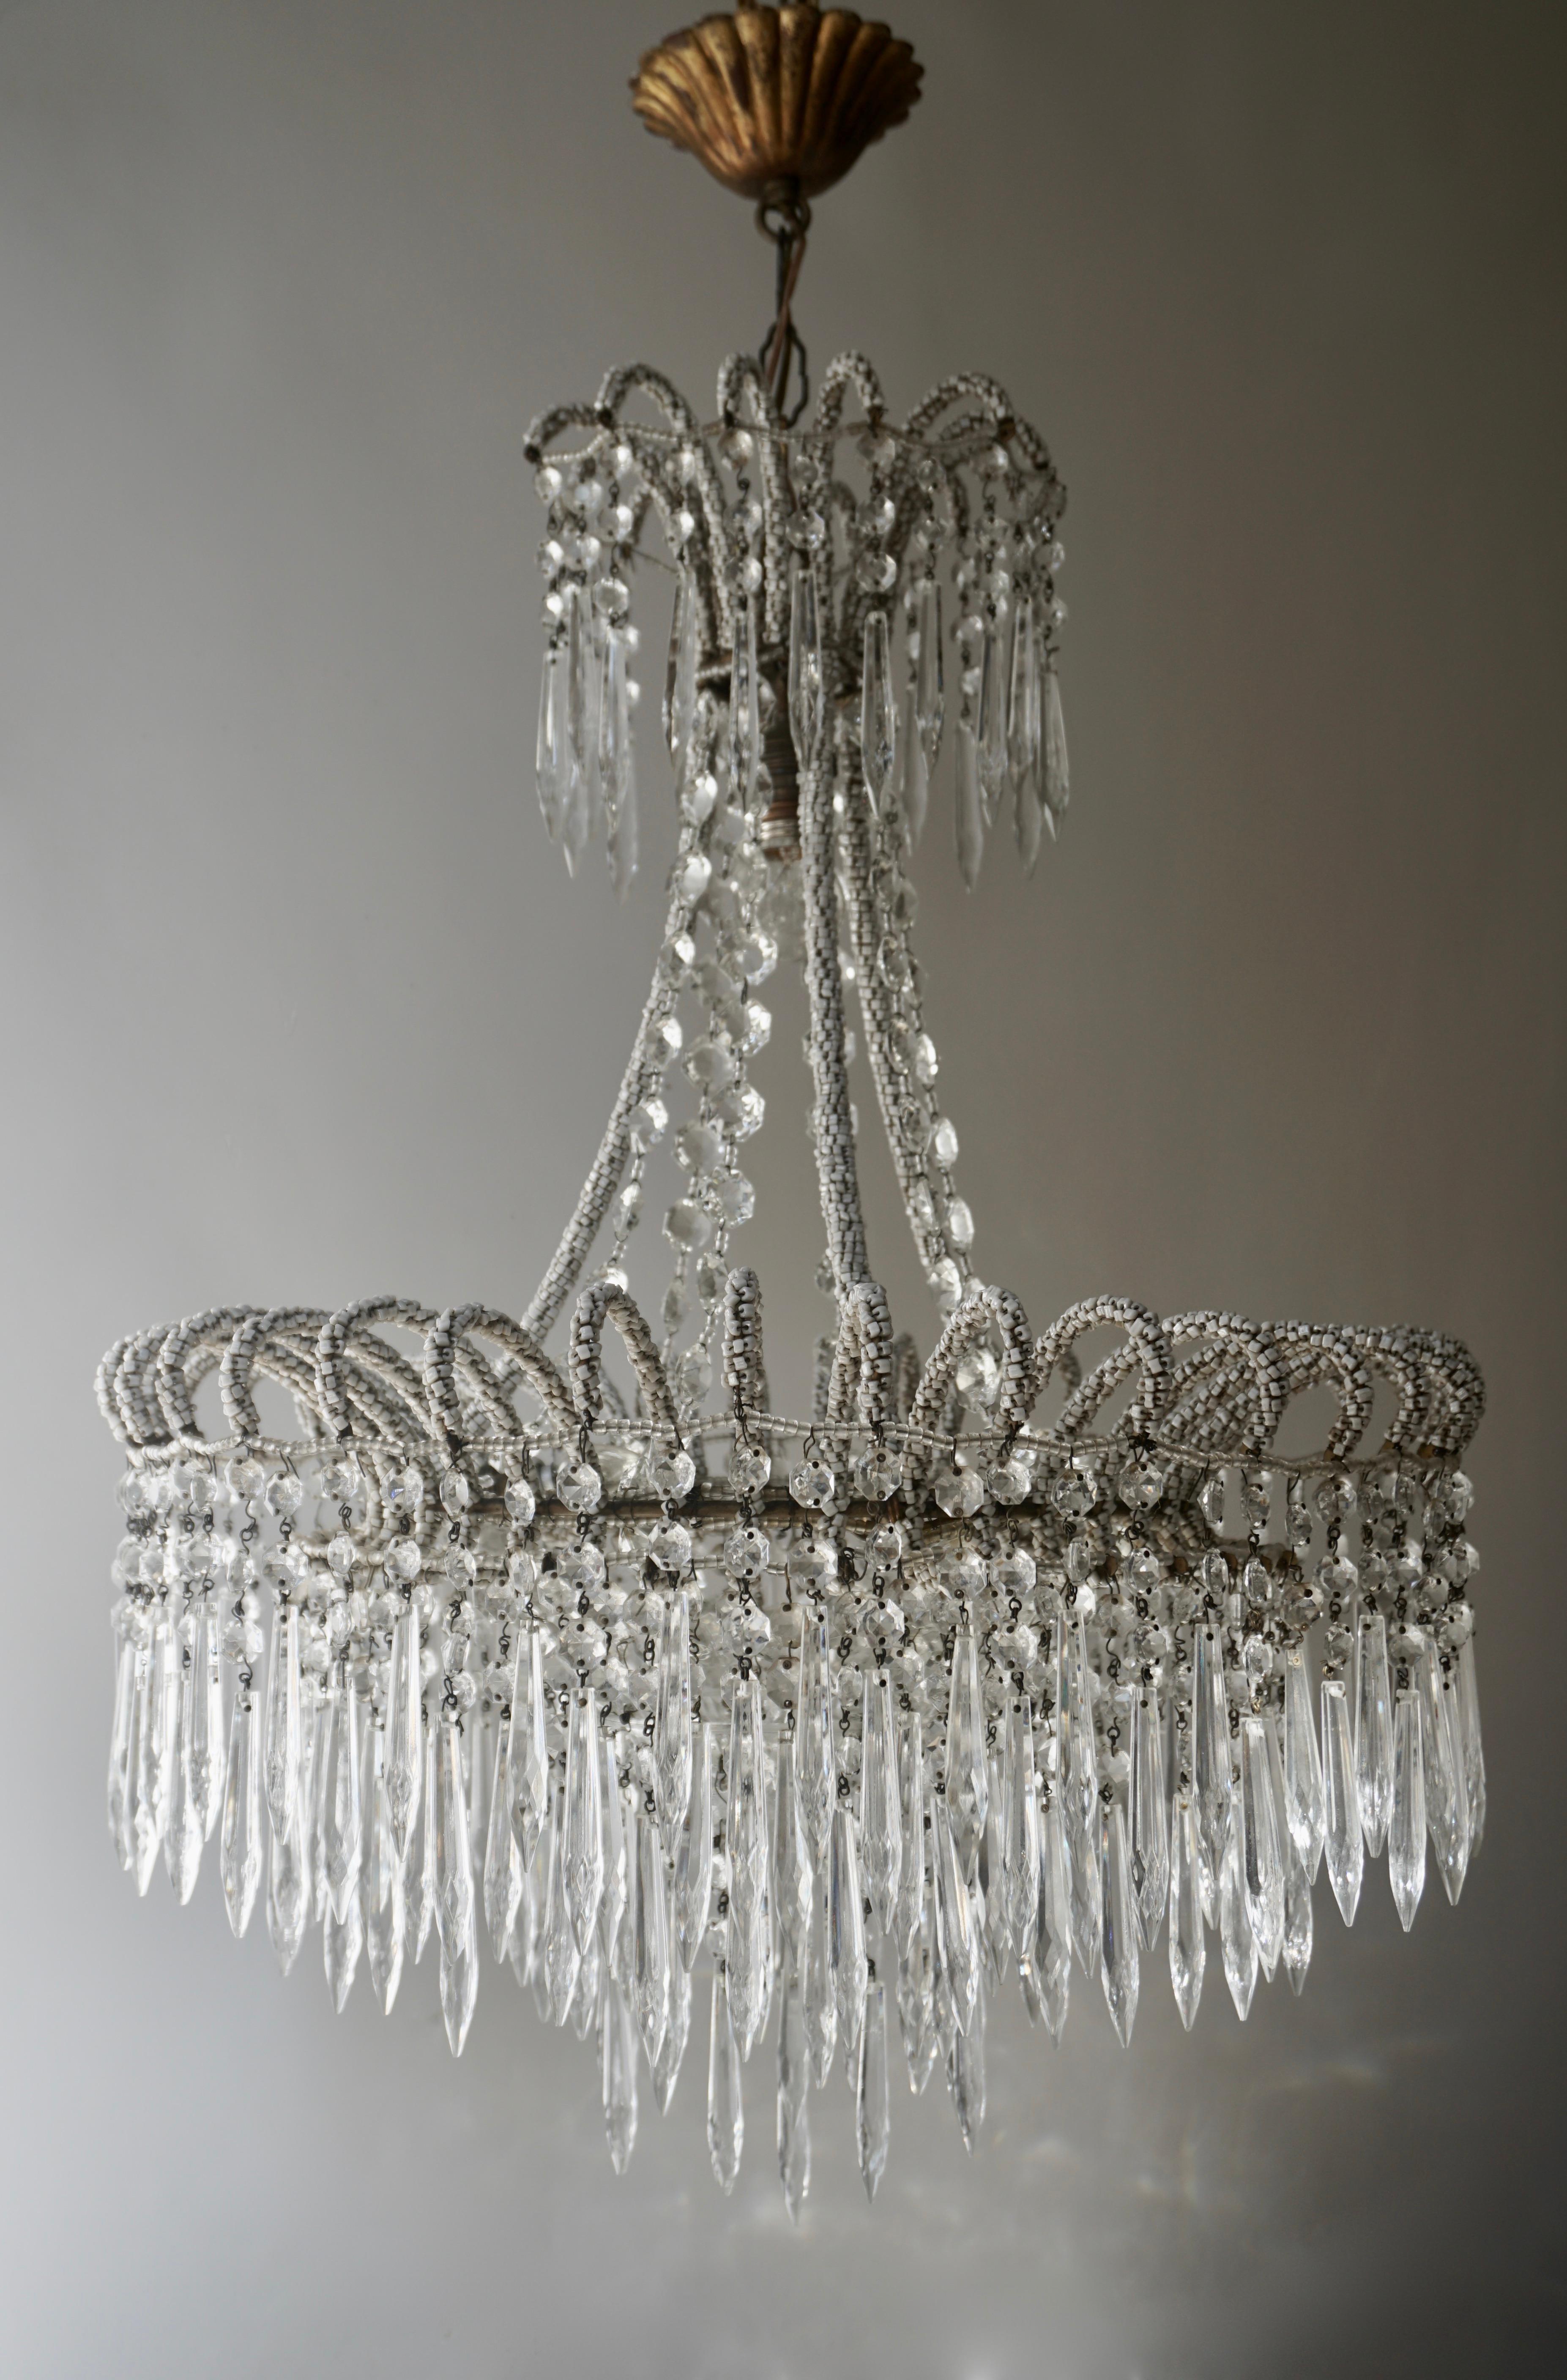 A crystal Victorian style waterfall chandelier with a brass frame that is covered with thousands of small white Murano glasses and three concentric rings hung with crystal icicle drops.

The light requires three single E14 and one E27 screw fit